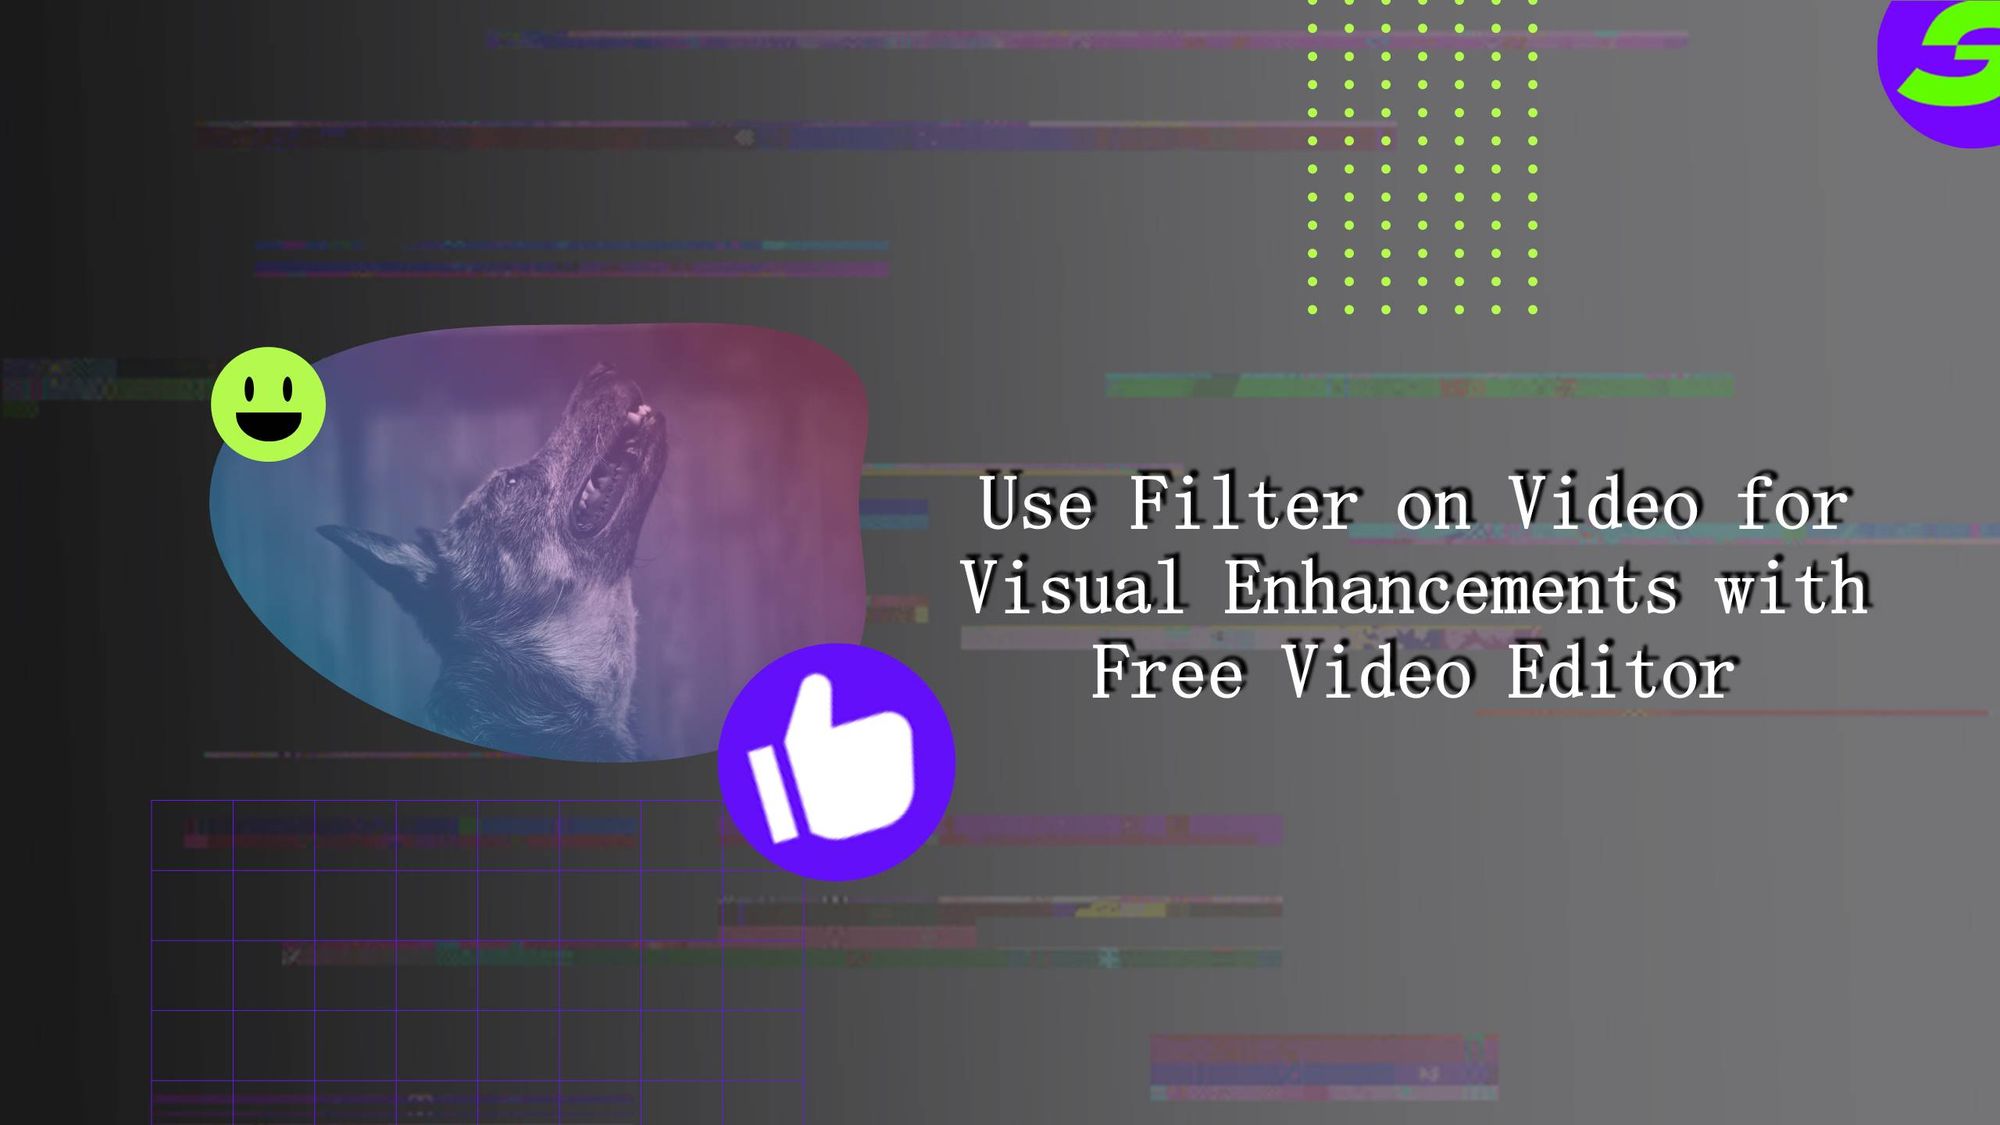 Introducing ShotCut: Add Filter on Video with Just One Click